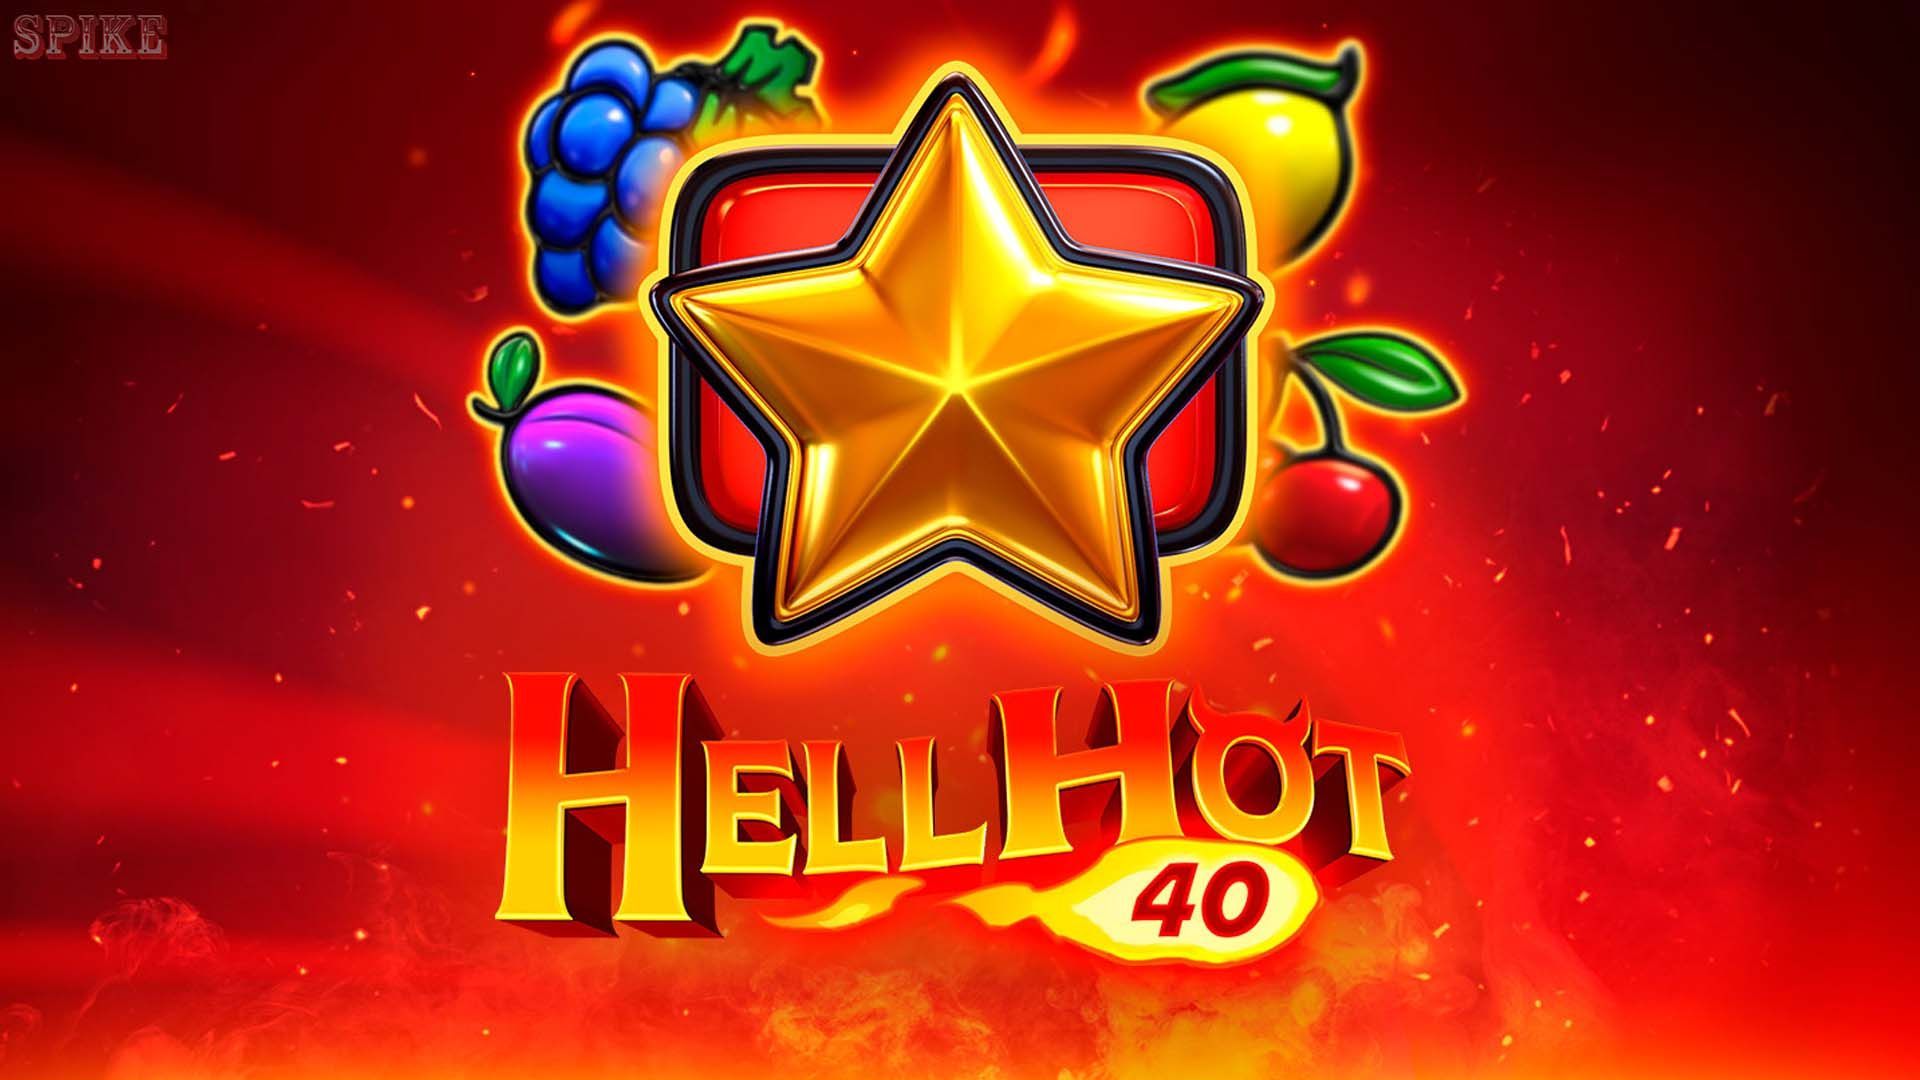 Hell Hot 40 Slot Machine Online Free Play